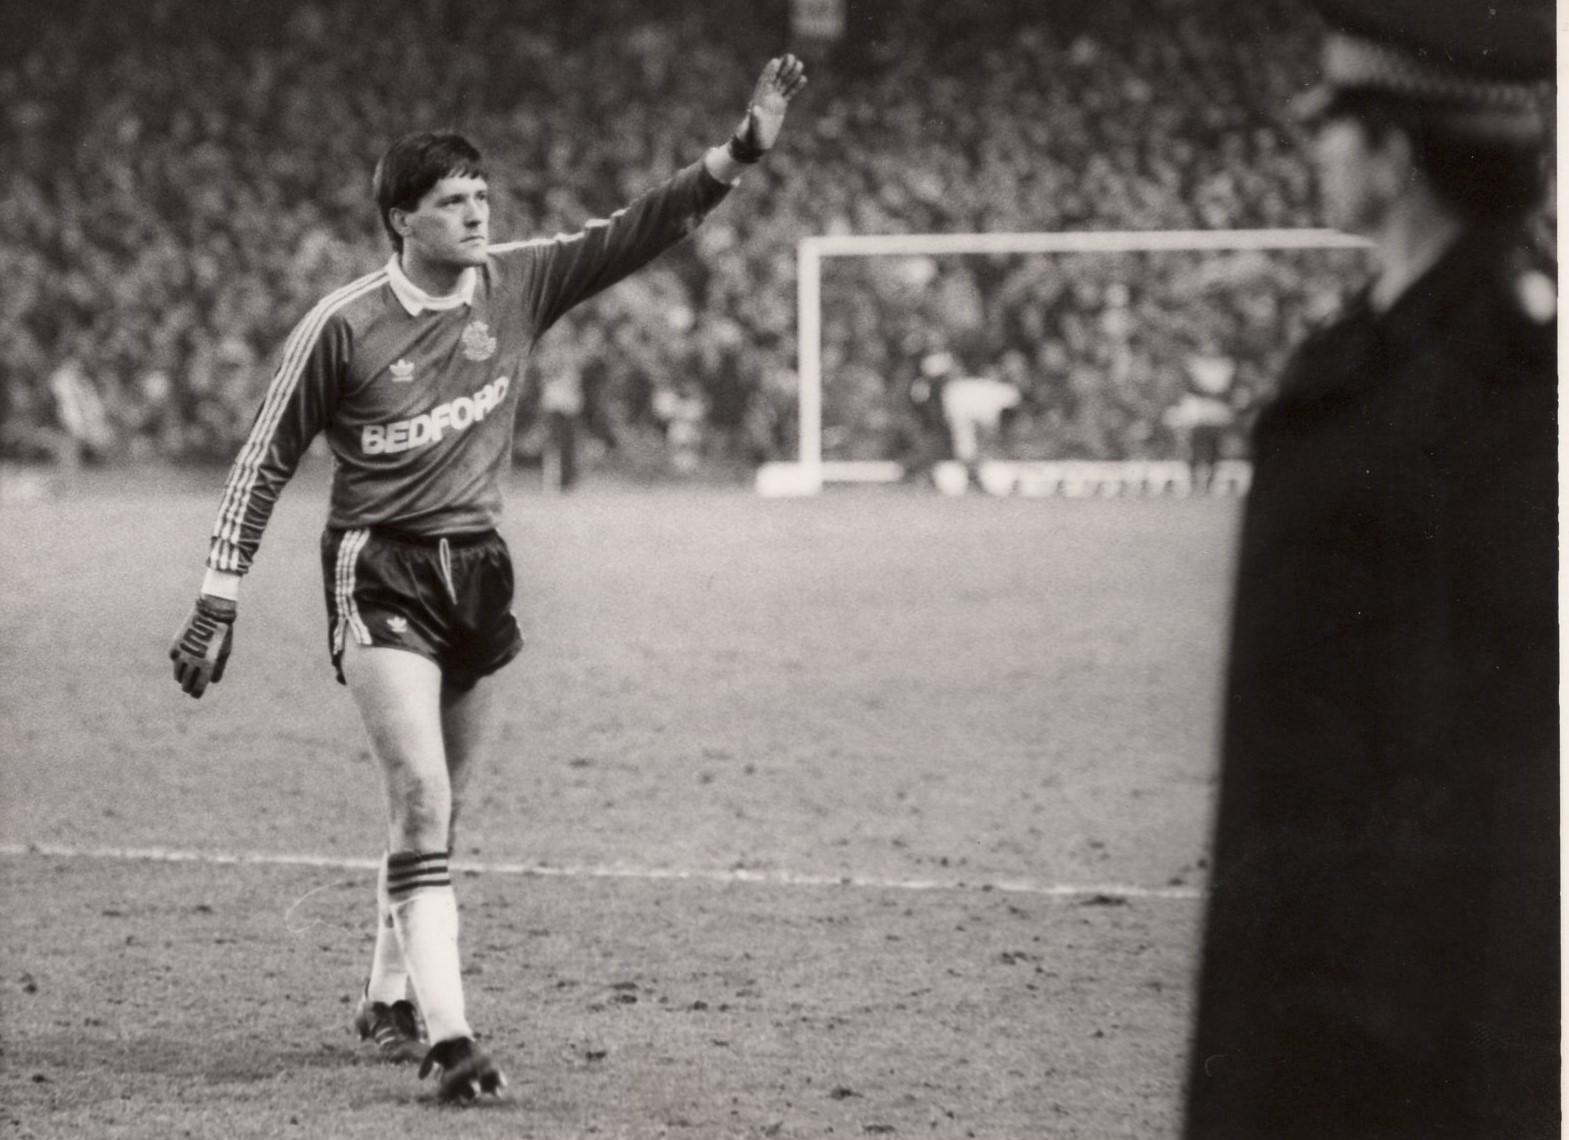 Les Sealey gives the travelling Town supporters a wave at full time